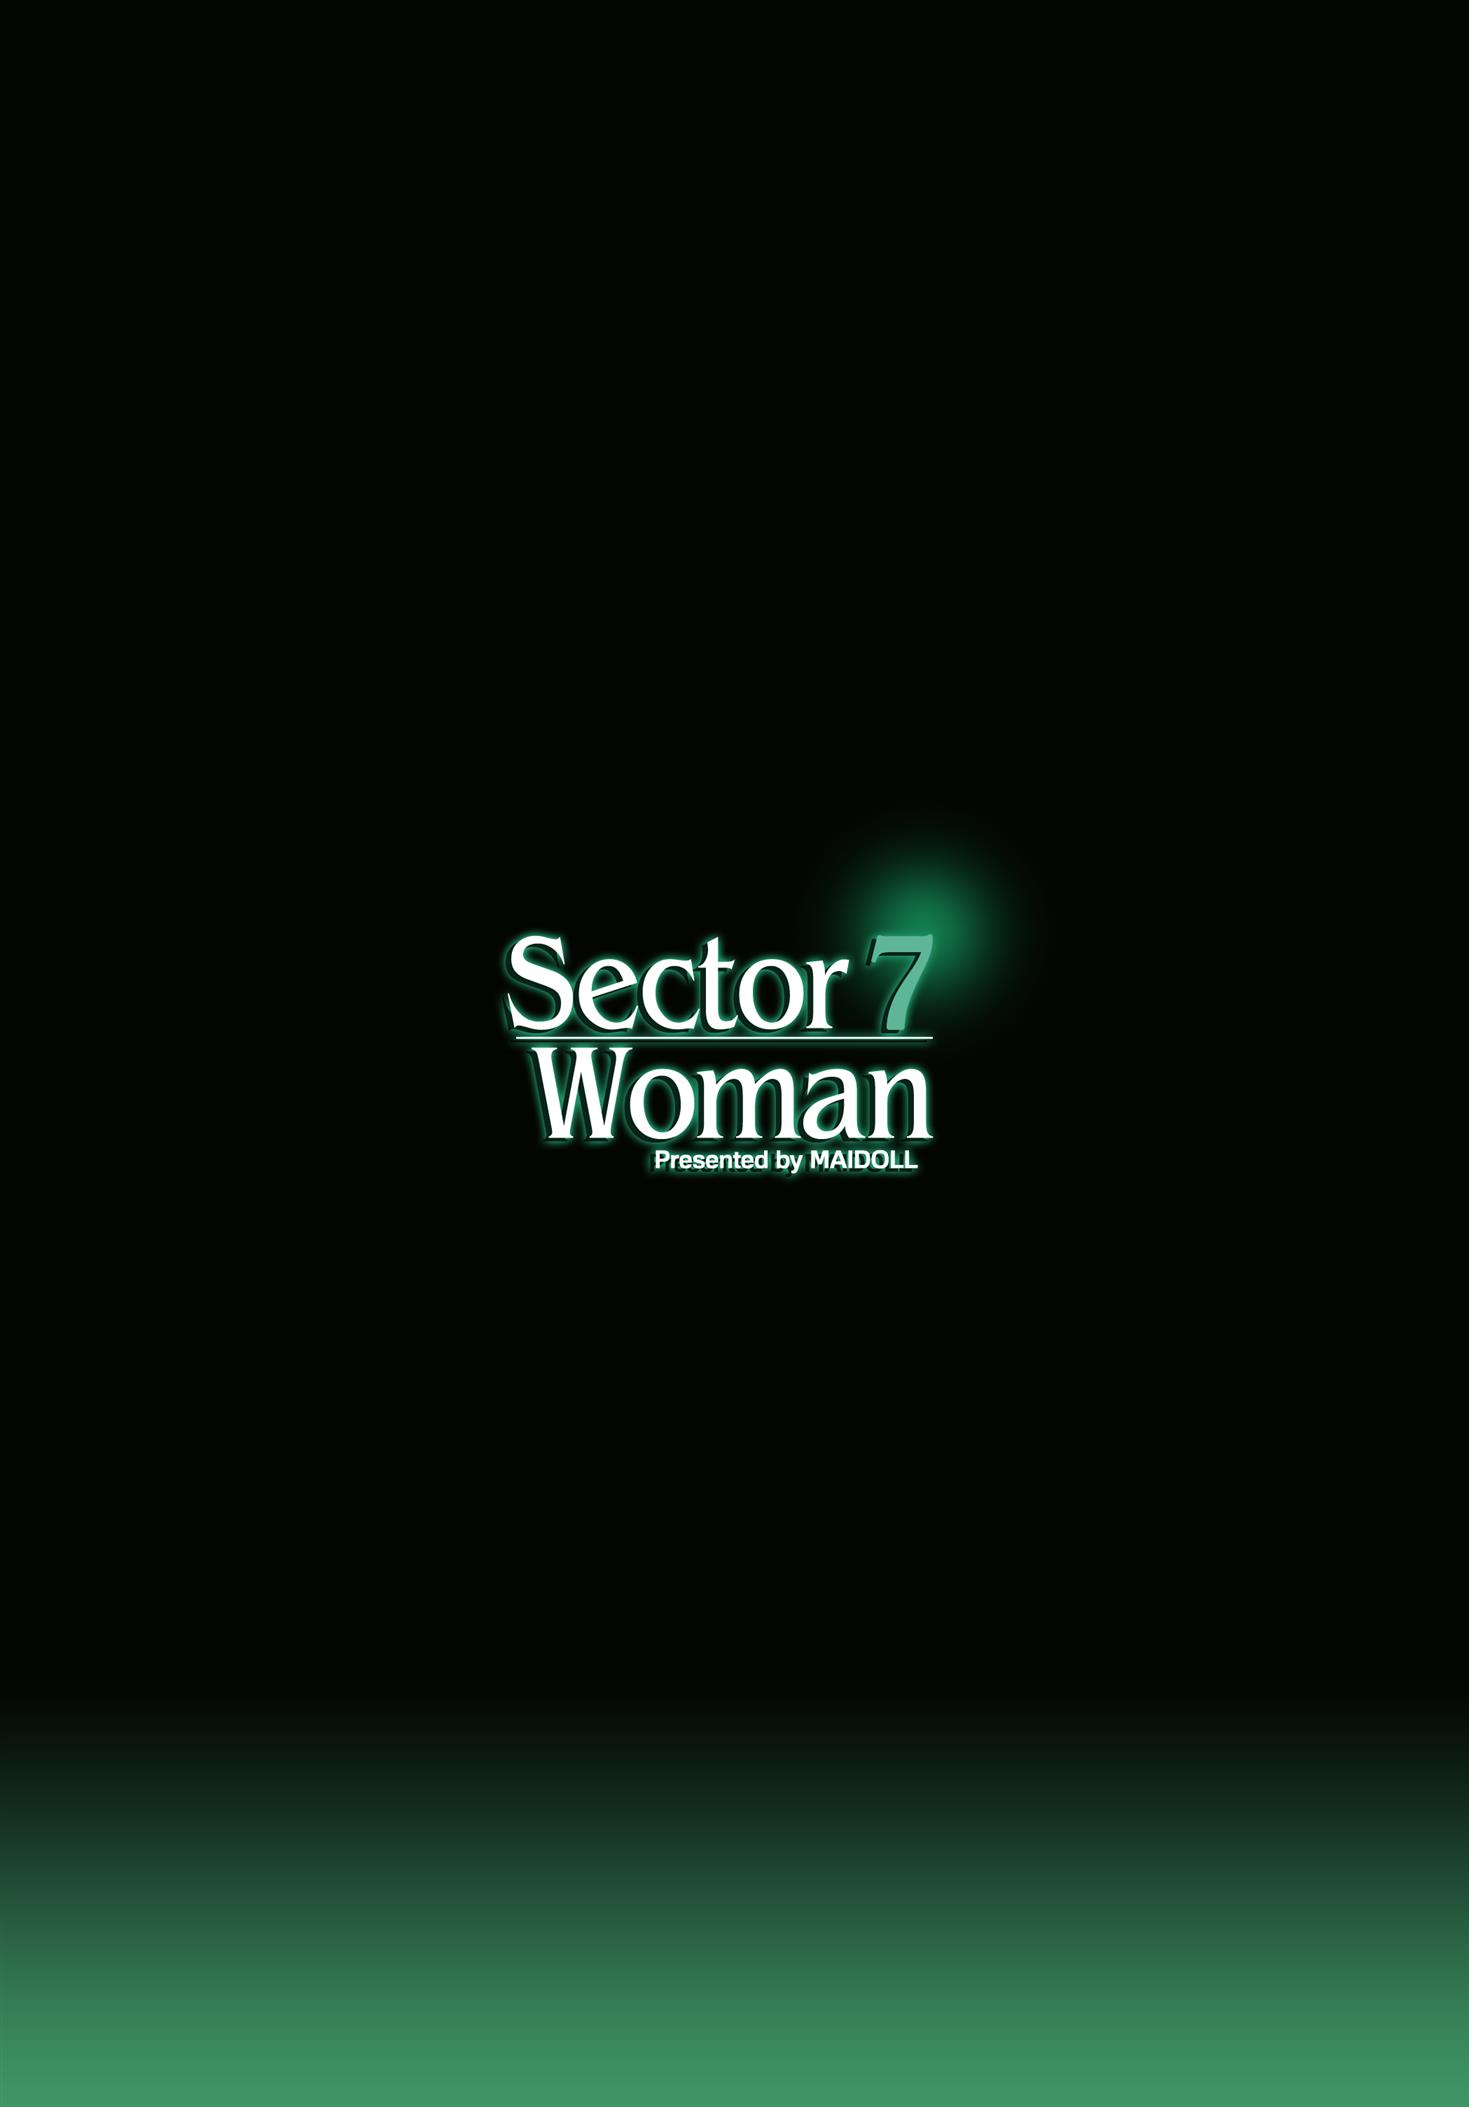 Sector 7 Woman